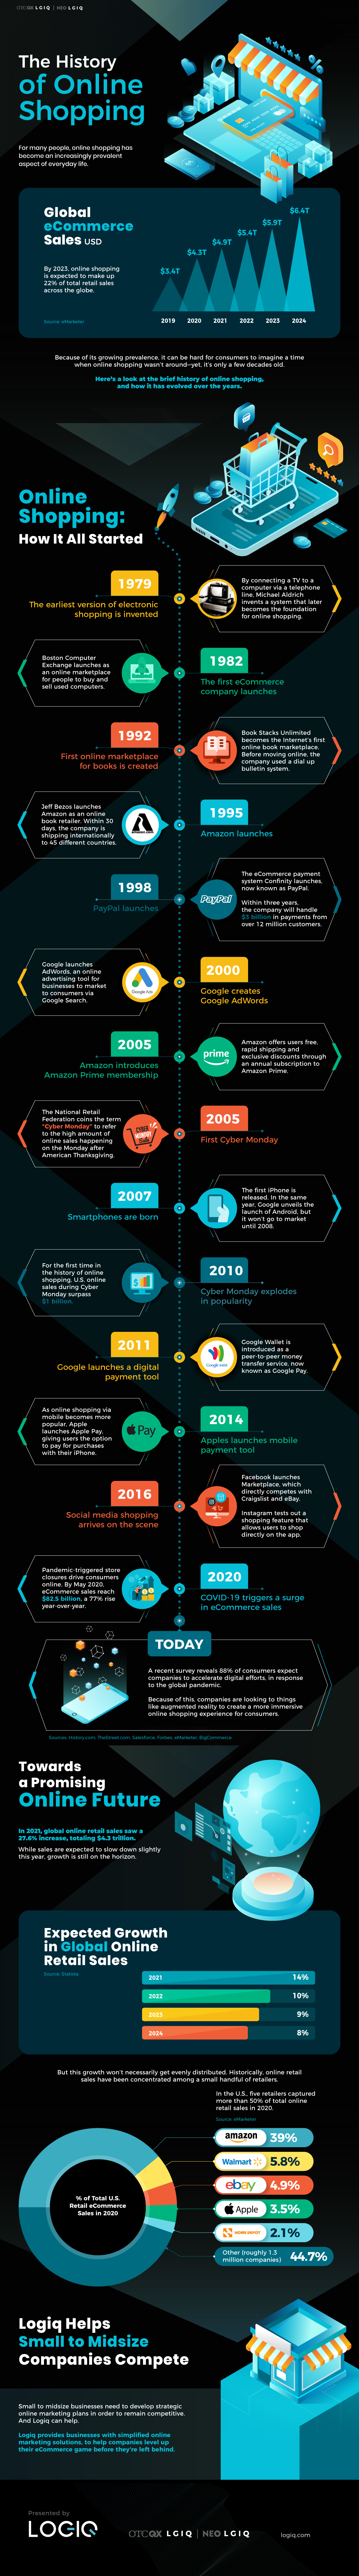 Timeline: Key Events in History of Online Shopping